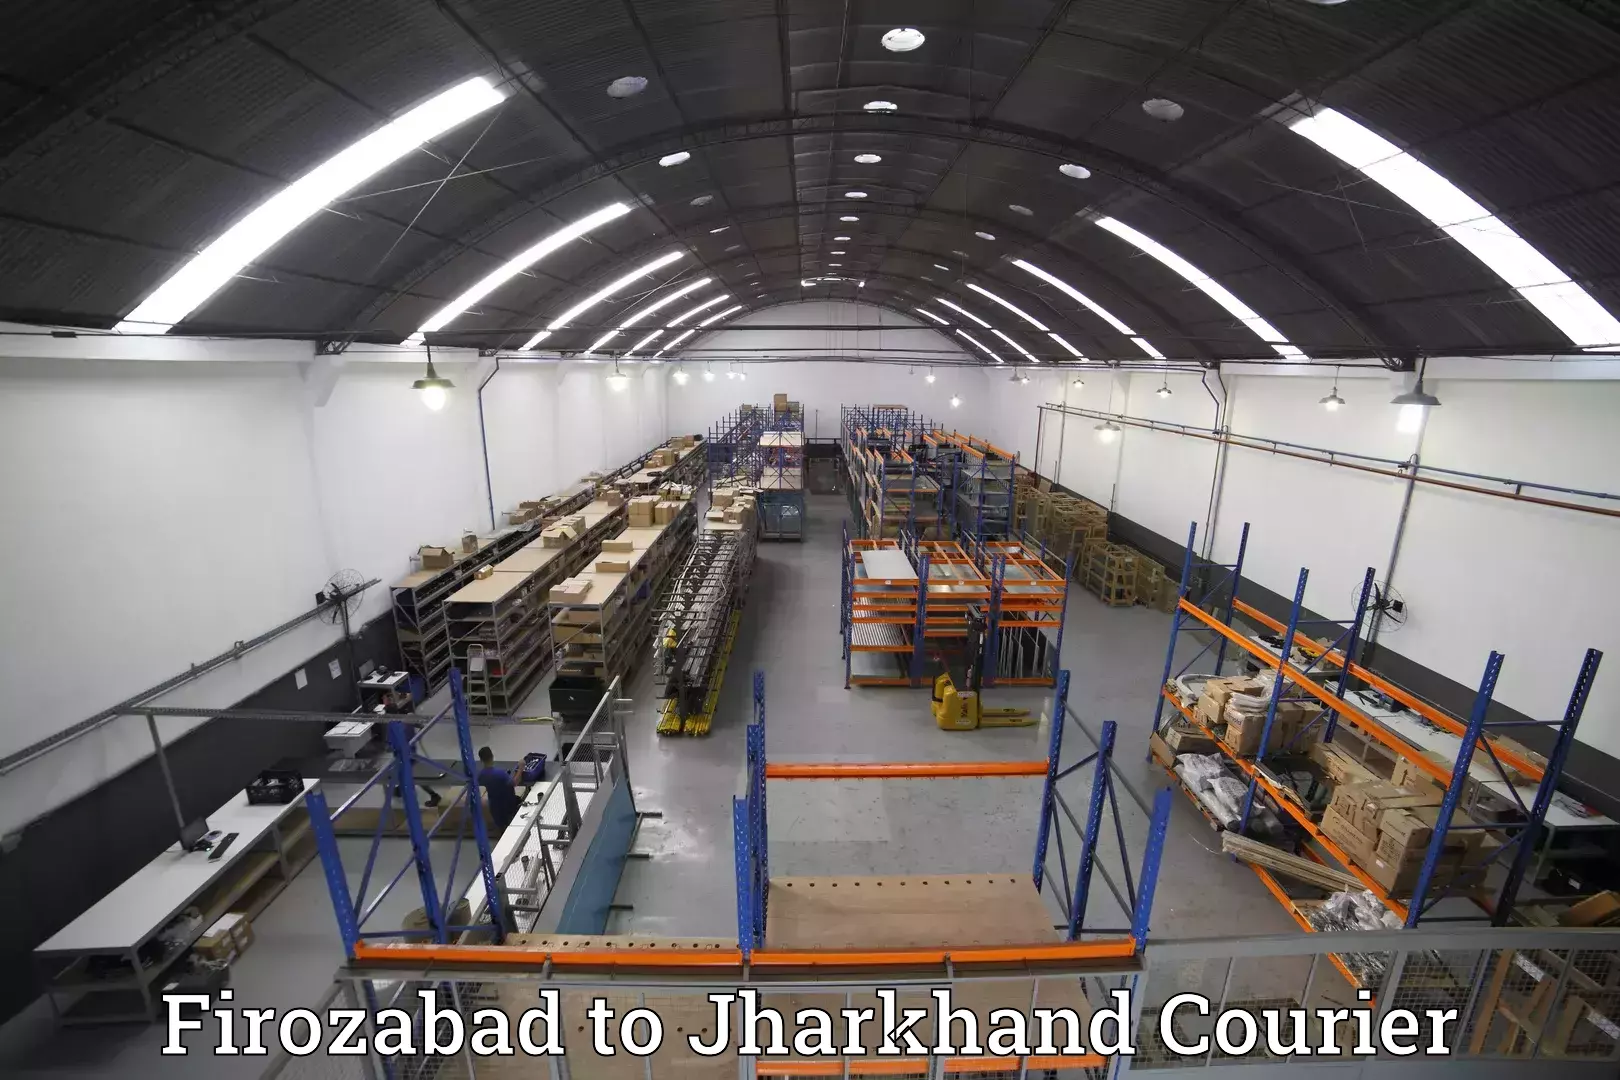 Baggage transport network Firozabad to Jharkhand